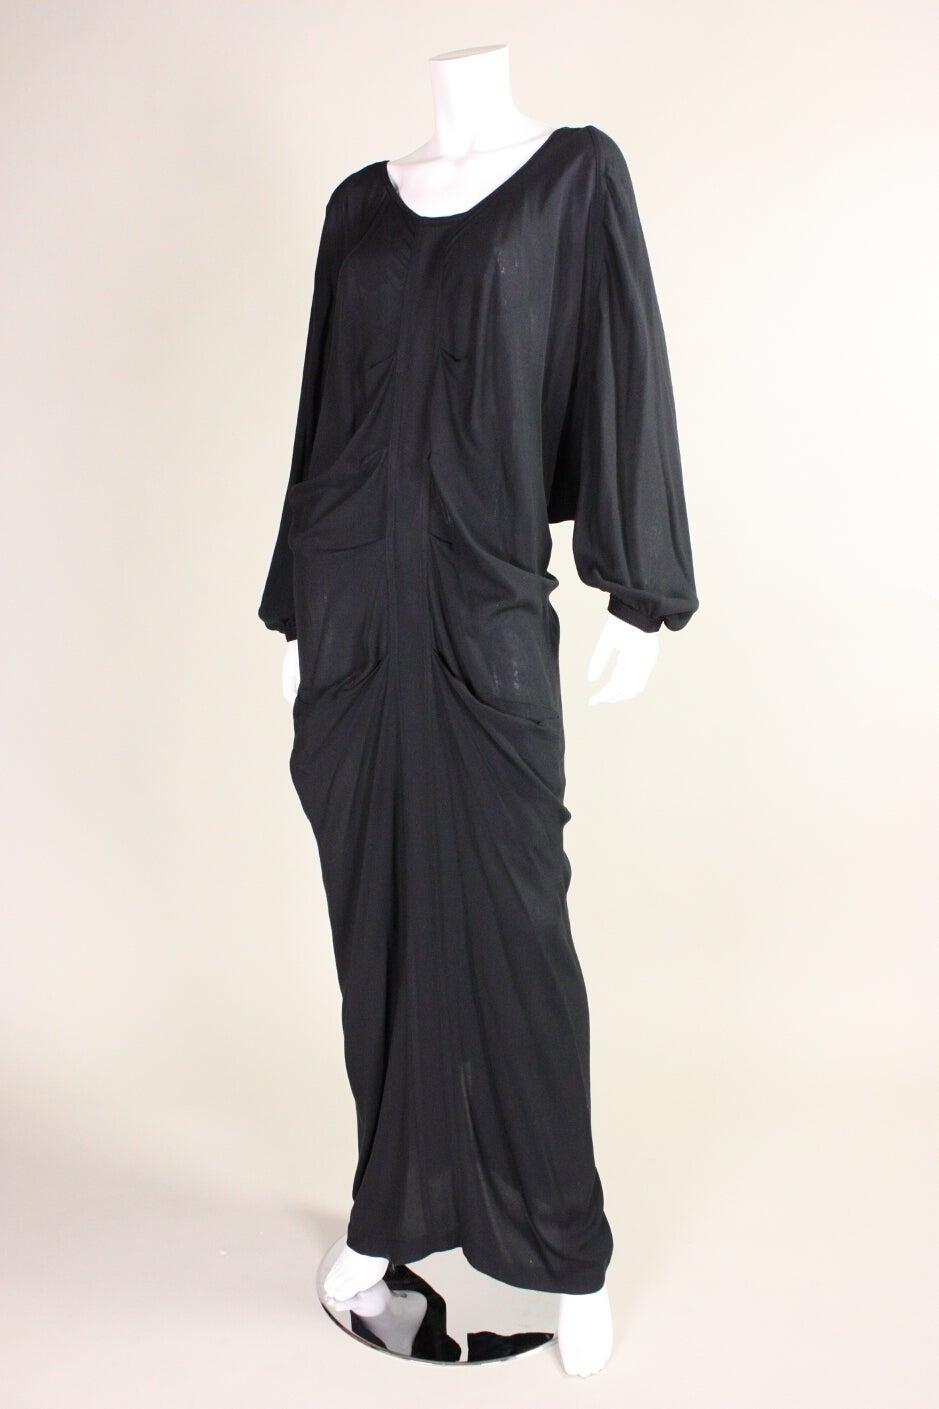 Yohji Yamamoto black gown is made of 100% rayon fabric and features pleated details at the center front.  Open back ties at the center back.  Dolman sleeve with elasticized cuff.  Center back exposed metal zipper.  Three pockets. 